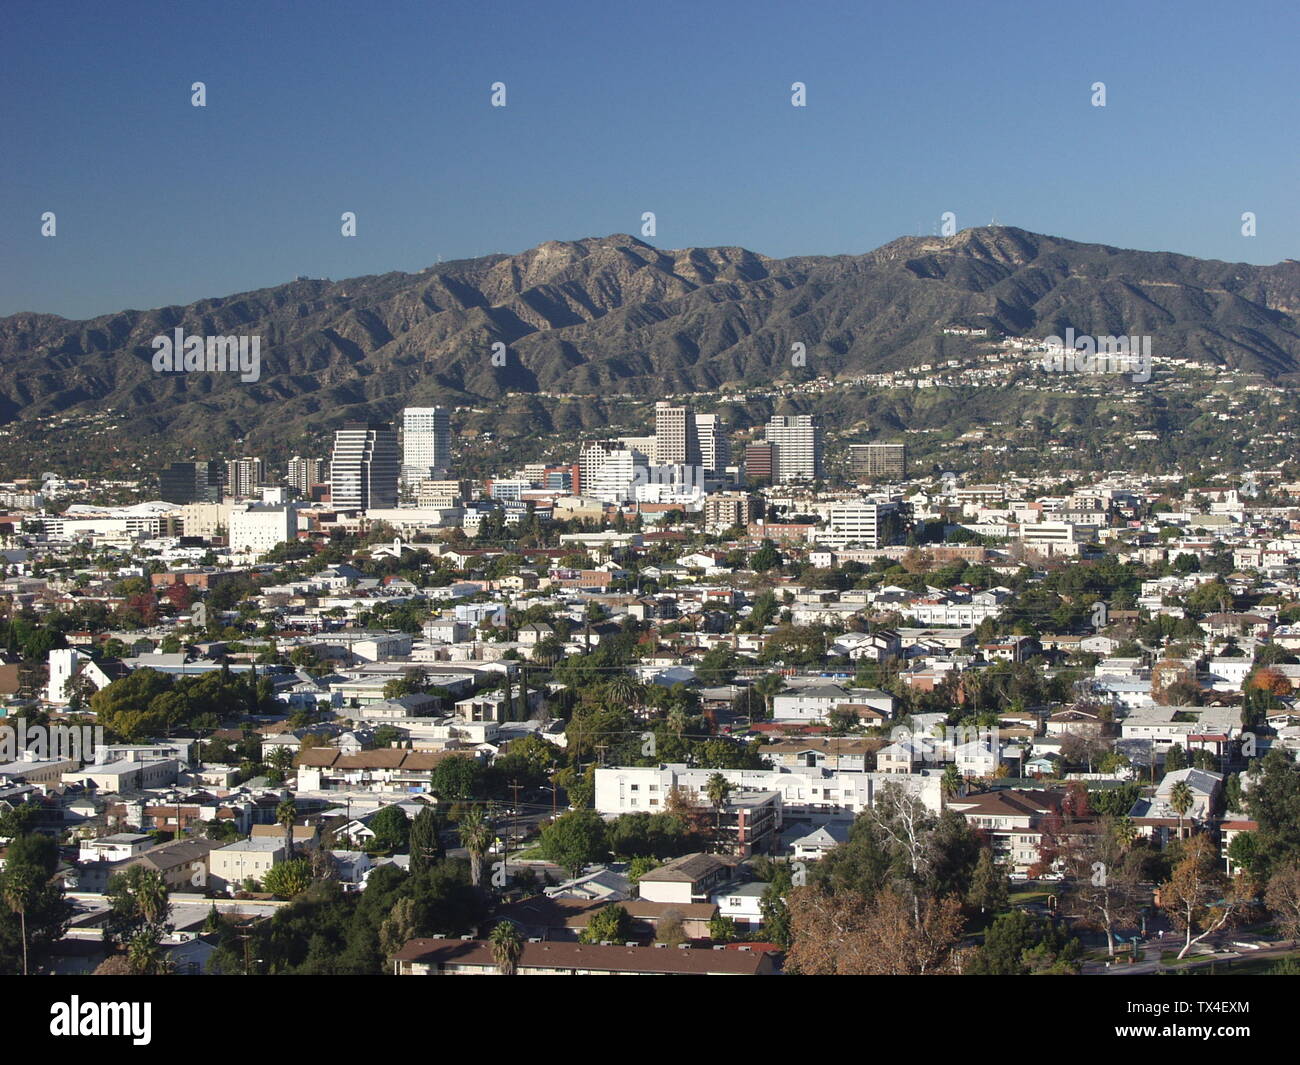 Downtown Glendale, California taken from Forest Lawn Memorial Park with the Verdugo Hills in the background. Stock Photo